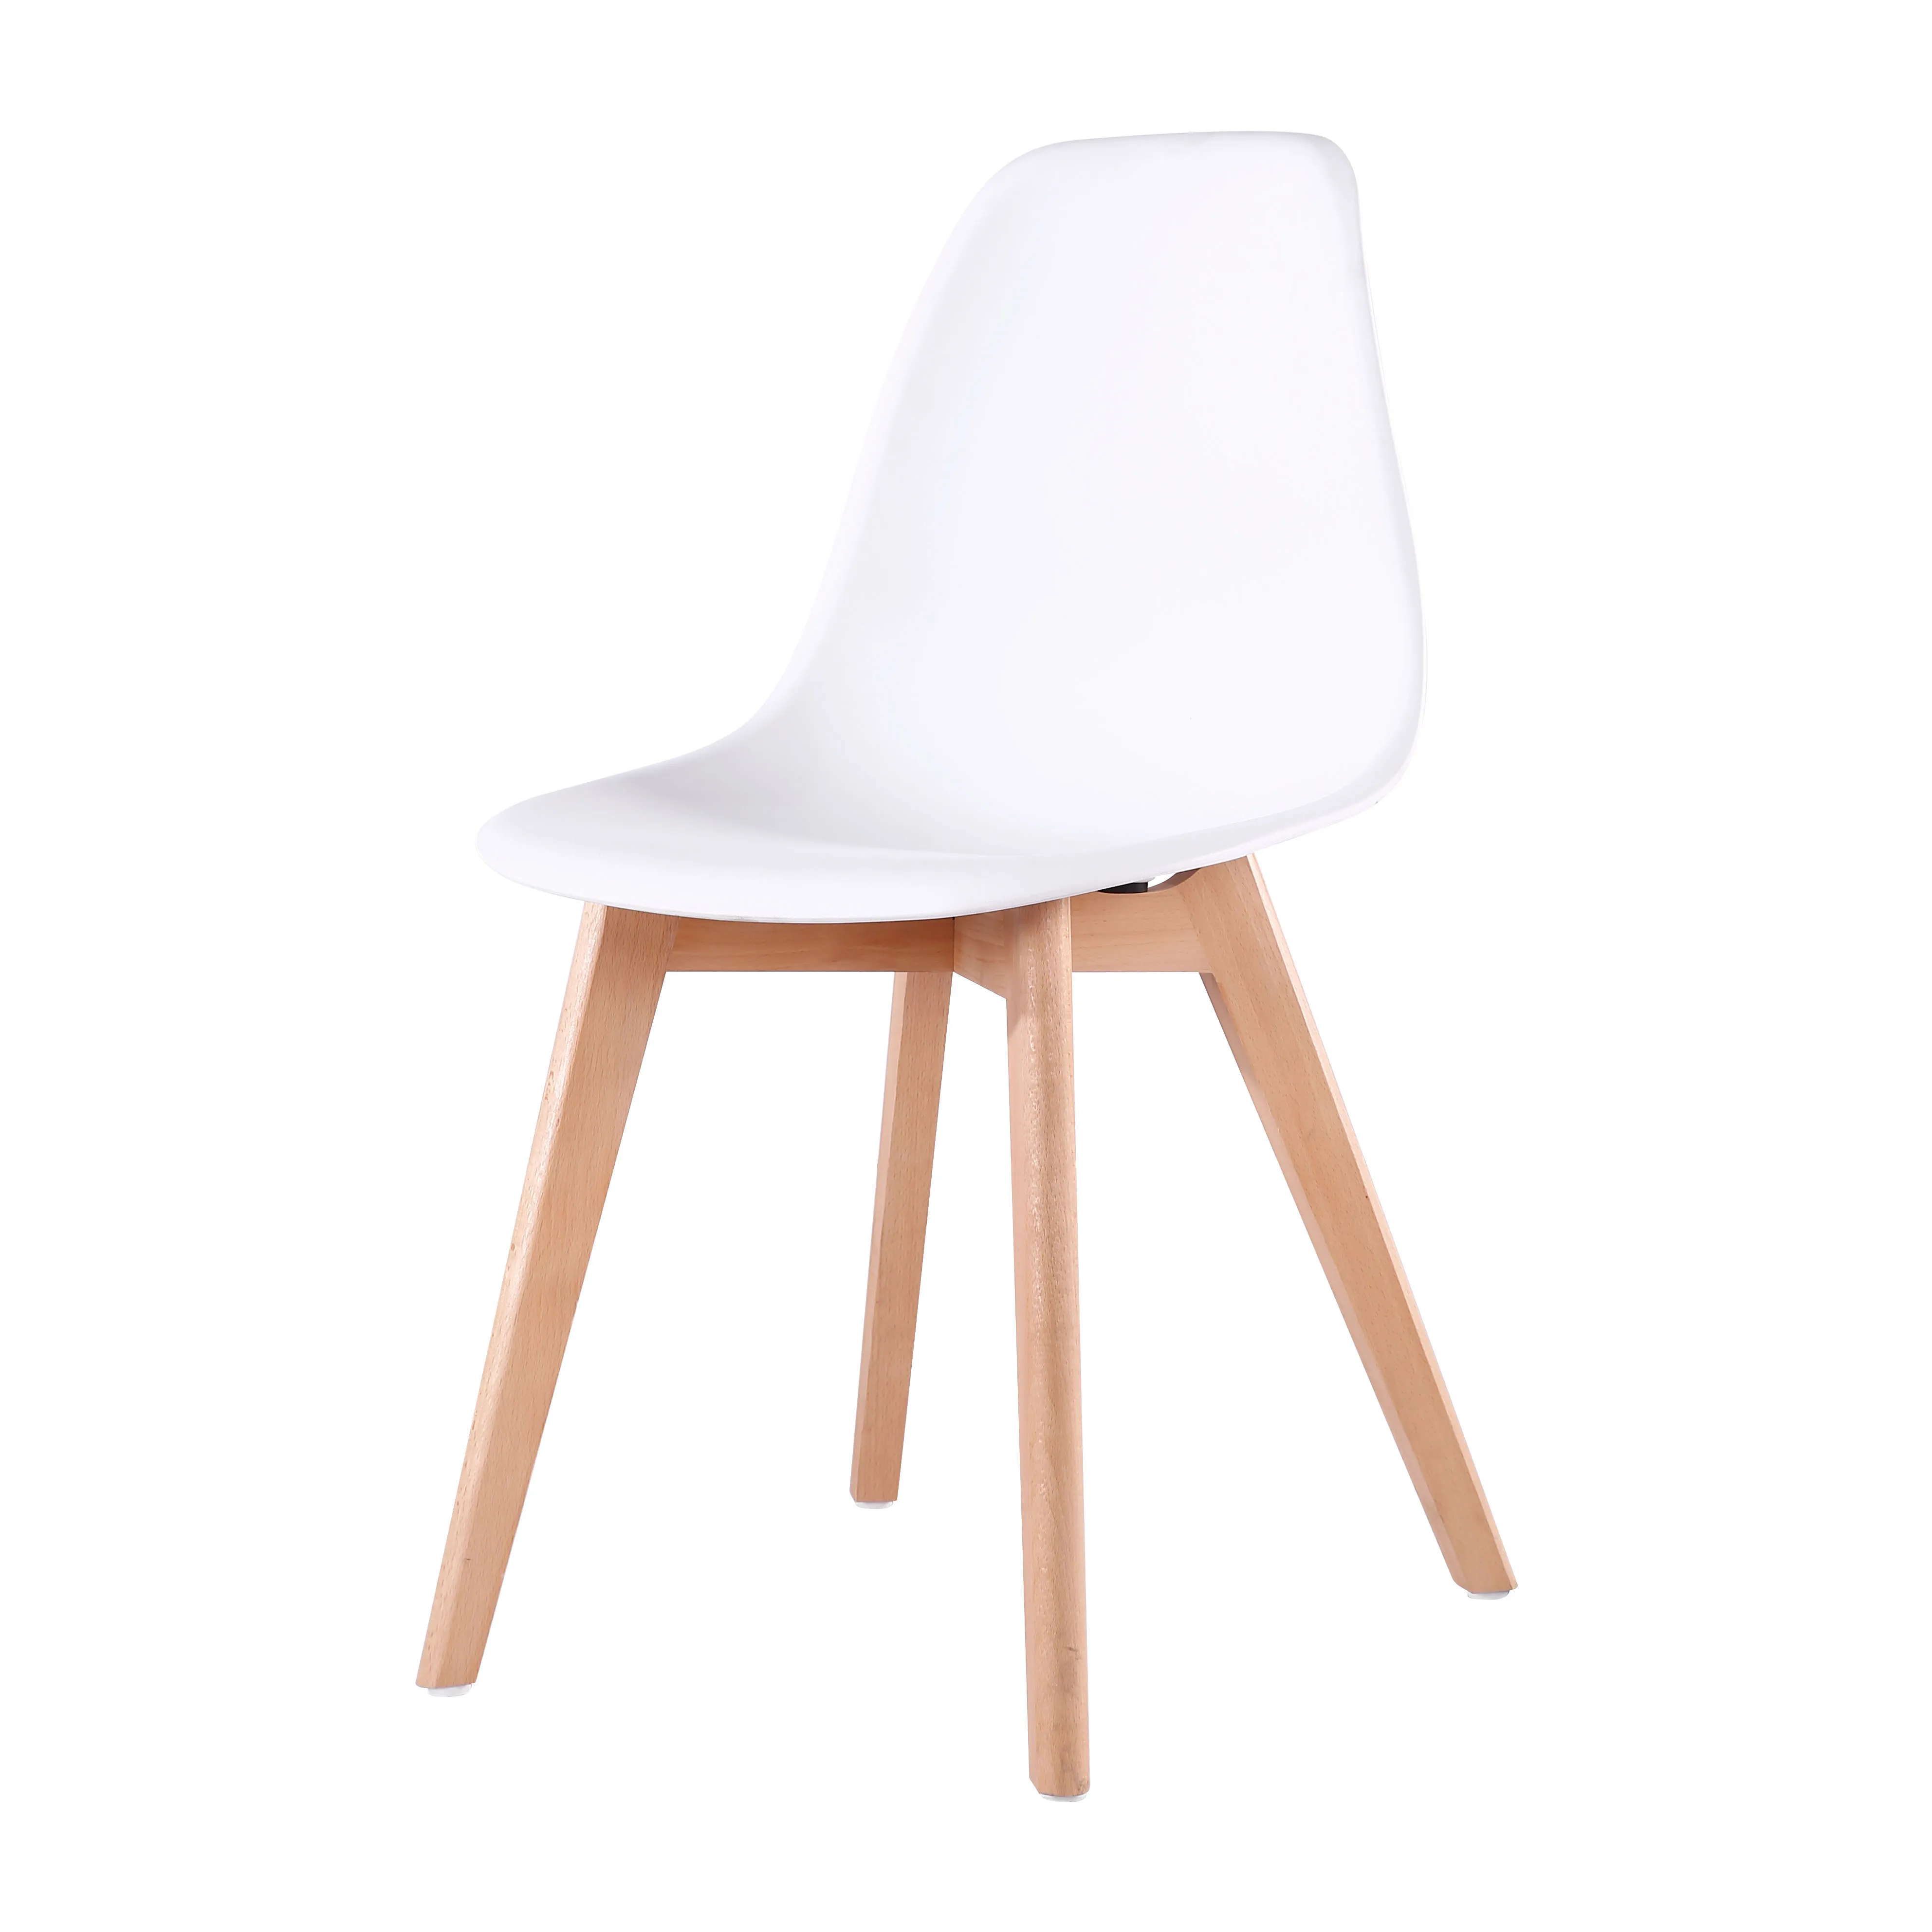 Wooden Legs Plastic Dinner Kitchen Dining Chairs For Sale Buy